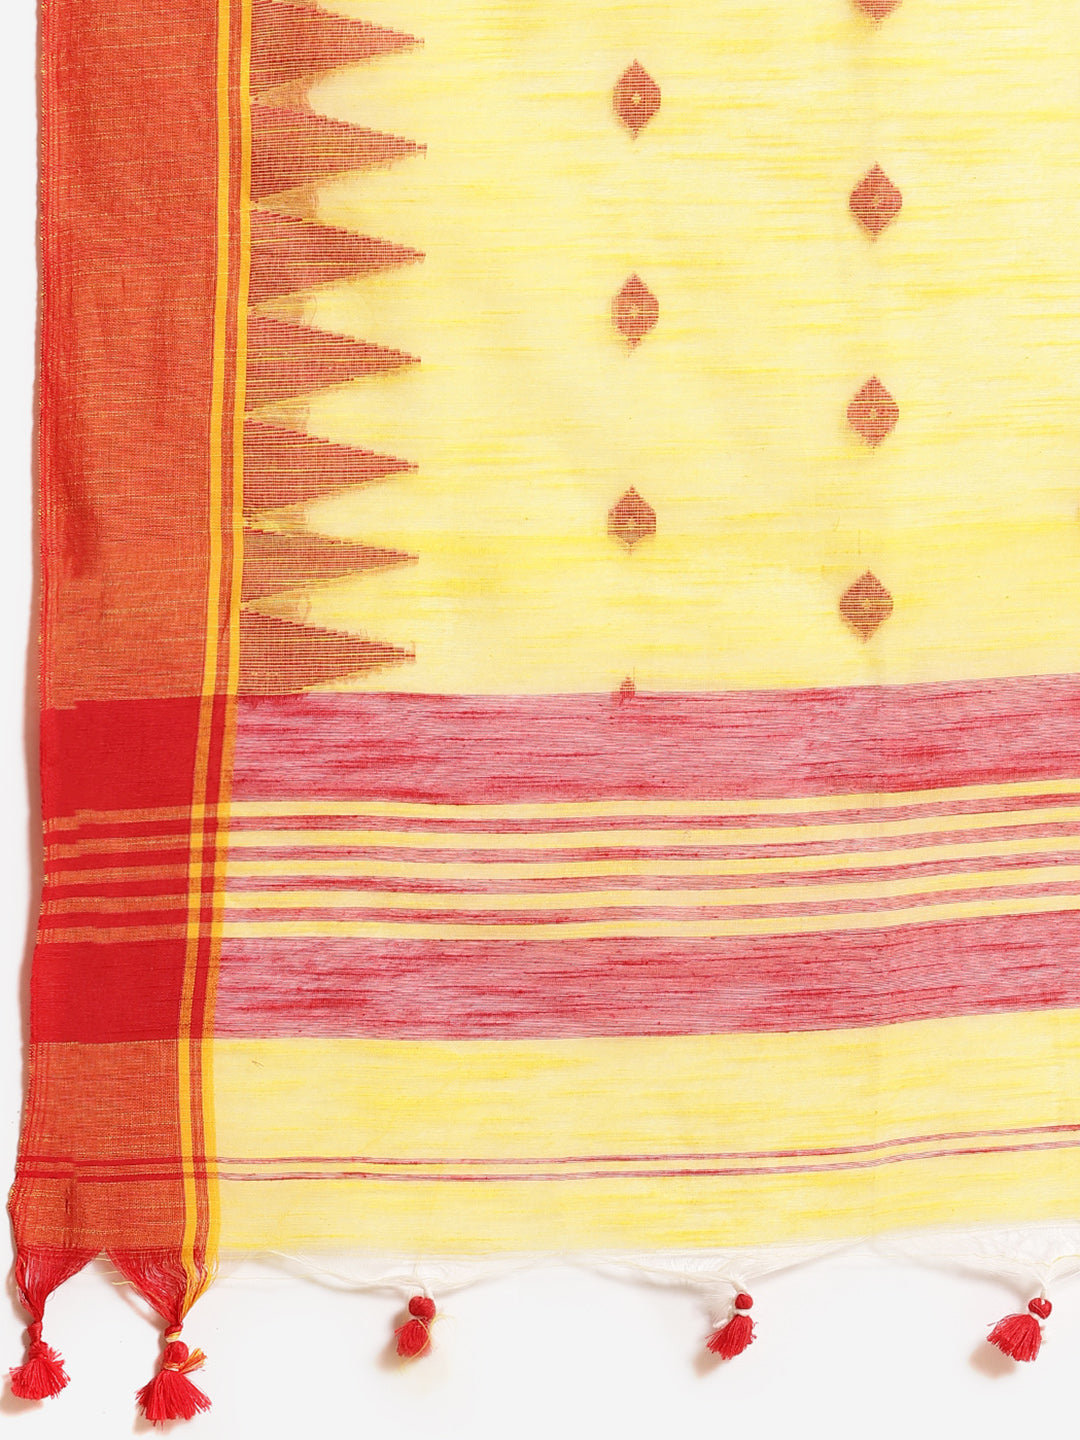 Yellow and Red, Kalakari India Ikat Silk Cotton Woven Design Saree with Blouse SHBESA0027-Saree-Kalakari India-SHBESA0027-Bengal, Cotton, Geographical Indication, Hand Crafted, Heritage Prints, Ikkat, Natural Dyes, Red, Sarees, Sustainable Fabrics, Woven, Yellow-[Linen,Ethnic,wear,Fashionista,Handloom,Handicraft,Indigo,blockprint,block,print,Cotton,Chanderi,Blue, latest,classy,party,bollywood,trendy,summer,style,traditional,formal,elegant,unique,style,hand,block,print, dabu,booti,gift,present,gl